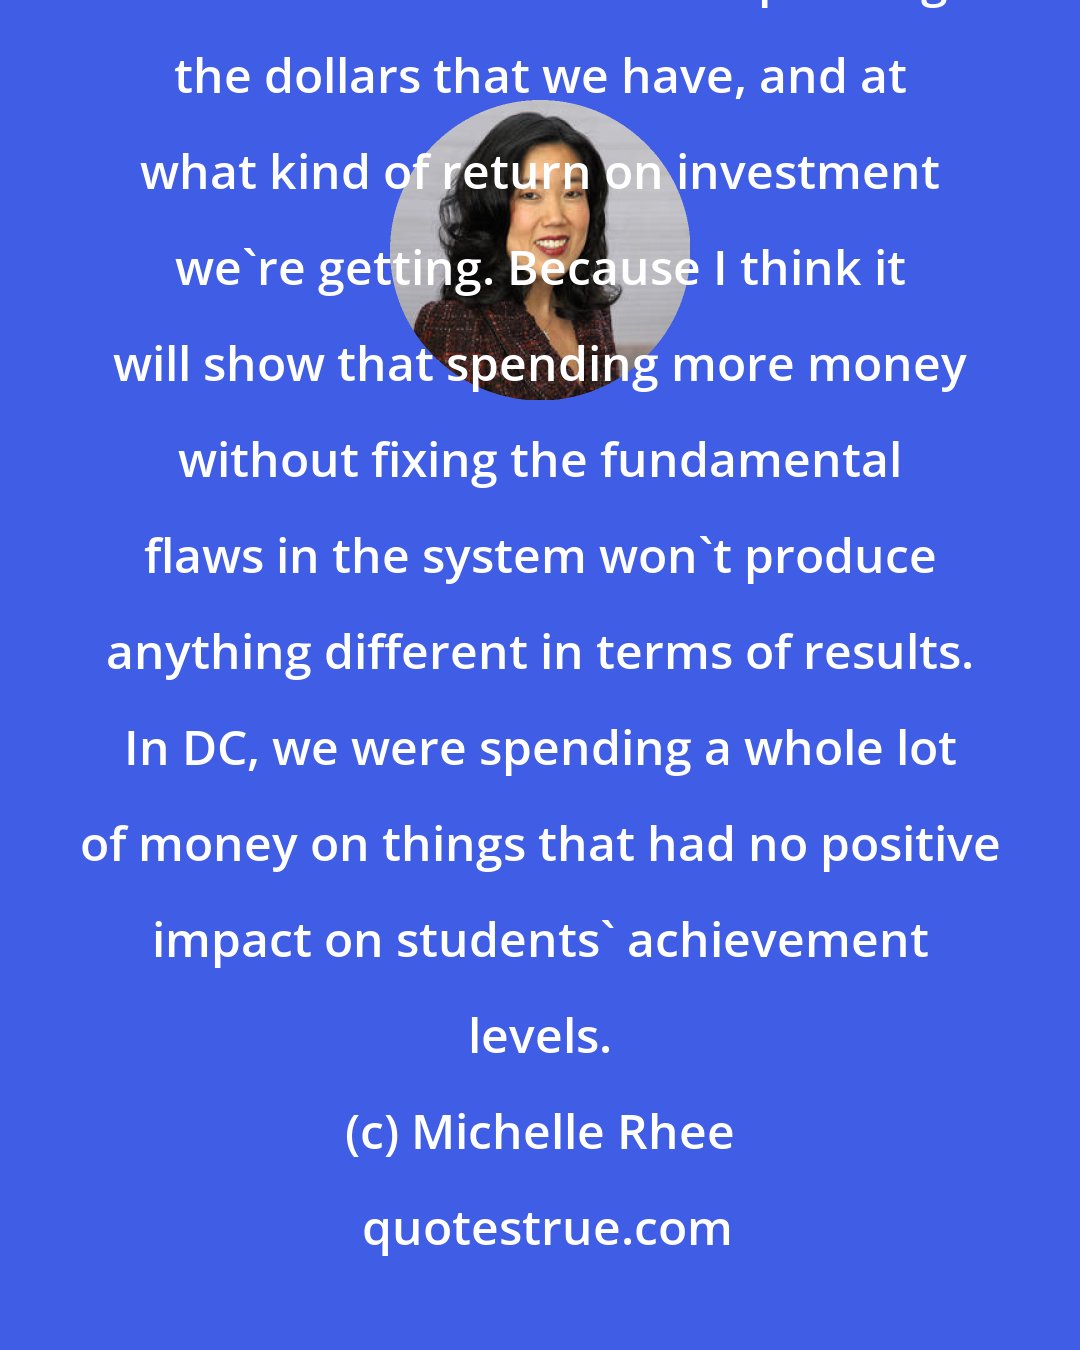 Michelle Rhee: We are in tough economic times right now, and the first thing we have to do is look at how we're spending the dollars that we have, and at what kind of return on investment we're getting. Because I think it will show that spending more money without fixing the fundamental flaws in the system won't produce anything different in terms of results. In DC, we were spending a whole lot of money on things that had no positive impact on students' achievement levels.